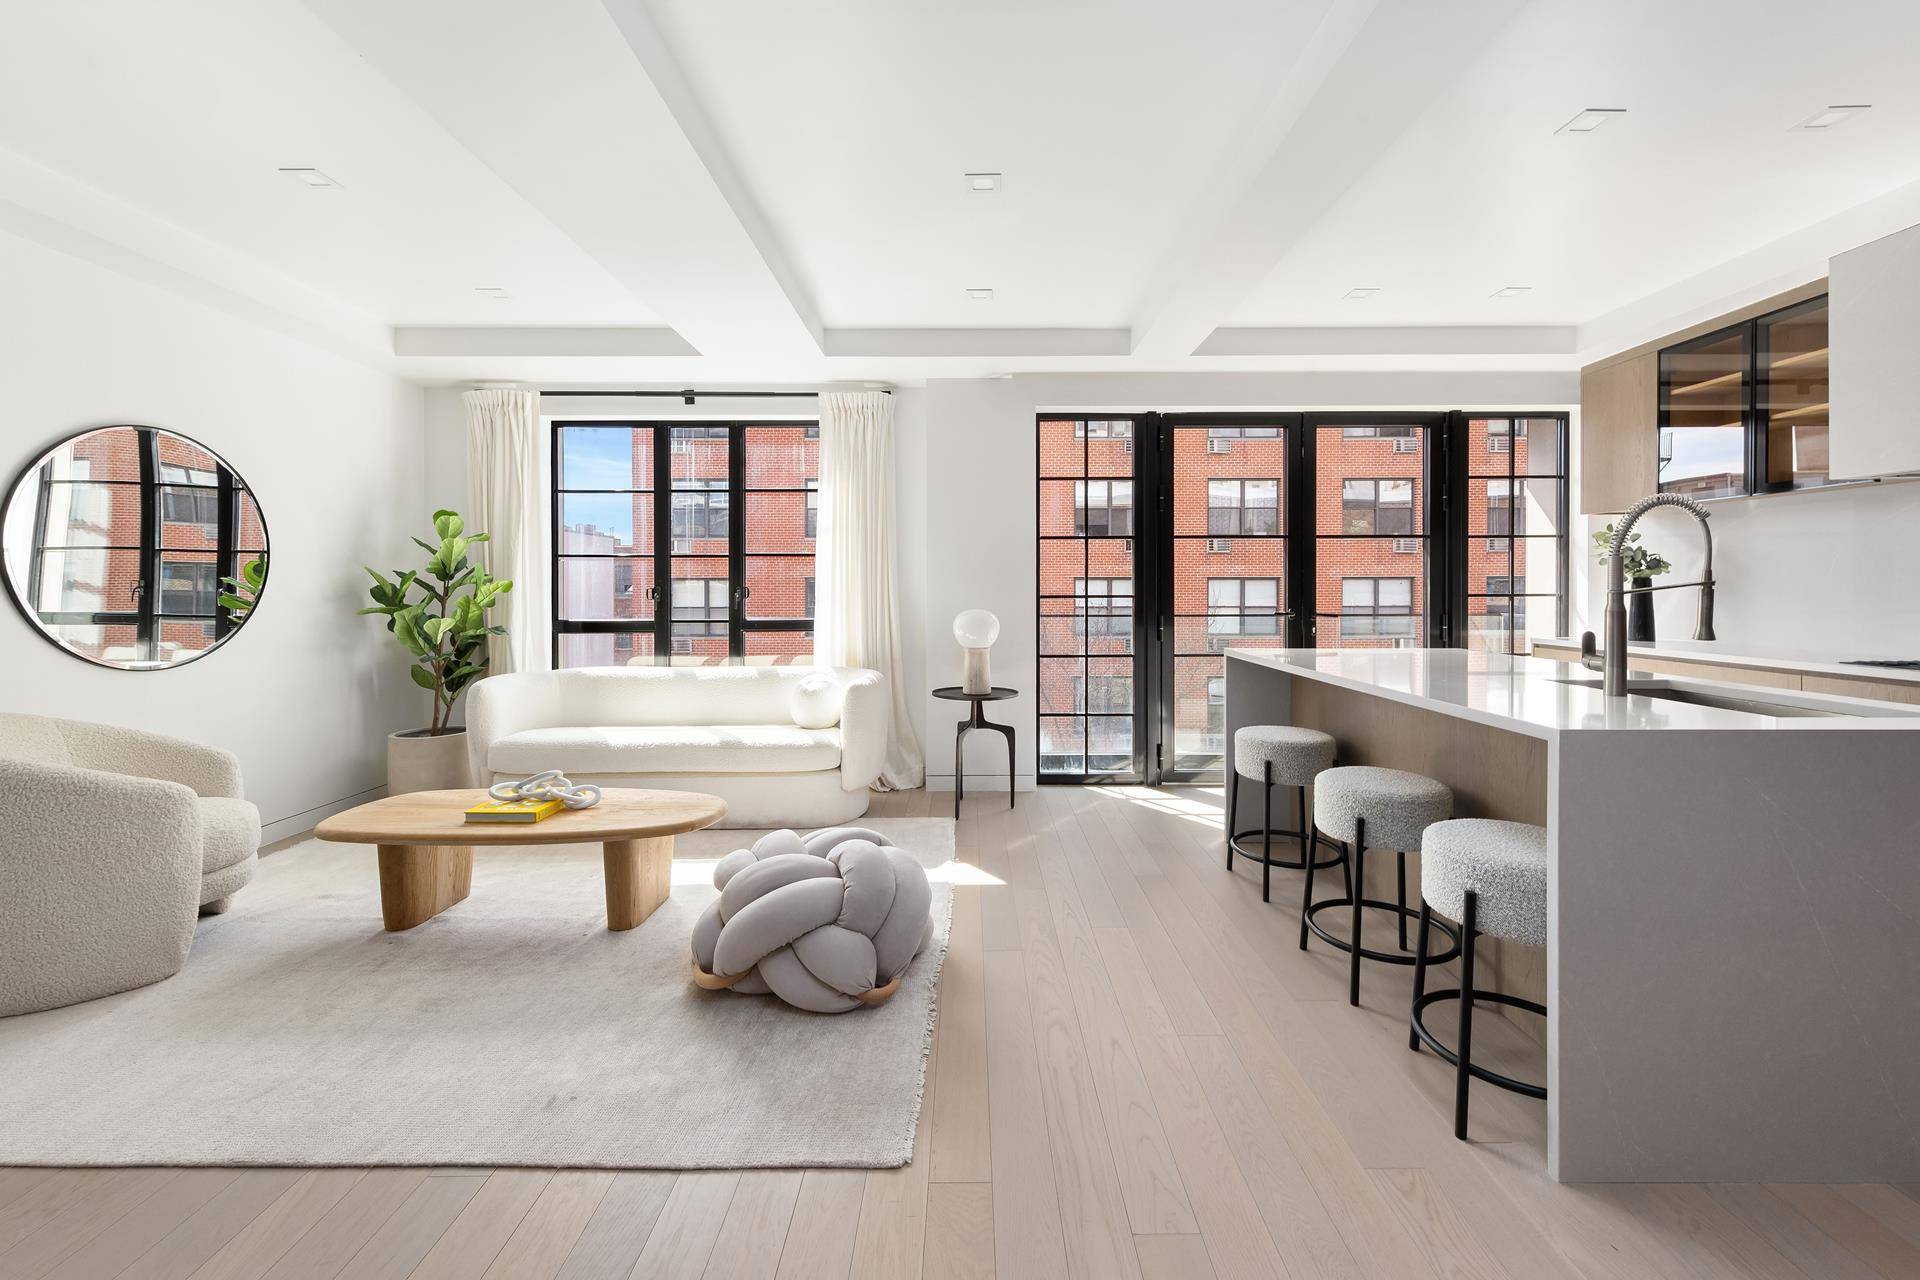 Residence 3A is a gracious 1, 326 square foot, two bedroom, two bathroom home with ample natural light and views of the historical tree lined Gramercy Park streets.